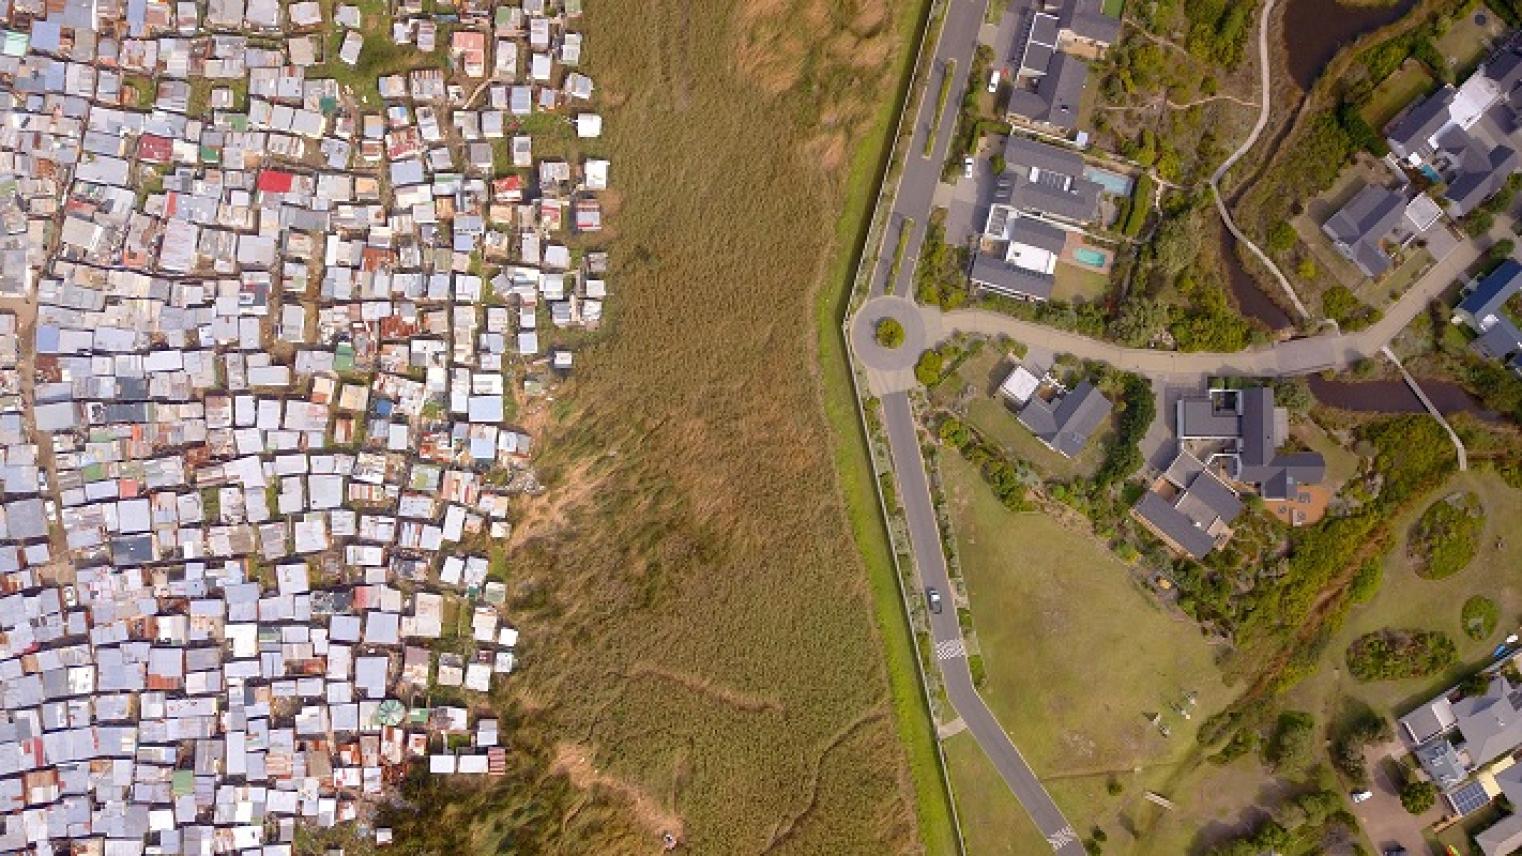 Aerial shot of township and rich suburb divided by wall, South Africa, https://stock.adobe.com/au/images/aerial-poor-township-and-rich-suburb-in-south-africa/791664914 , by fivepointsix, used under Adobe Education License 